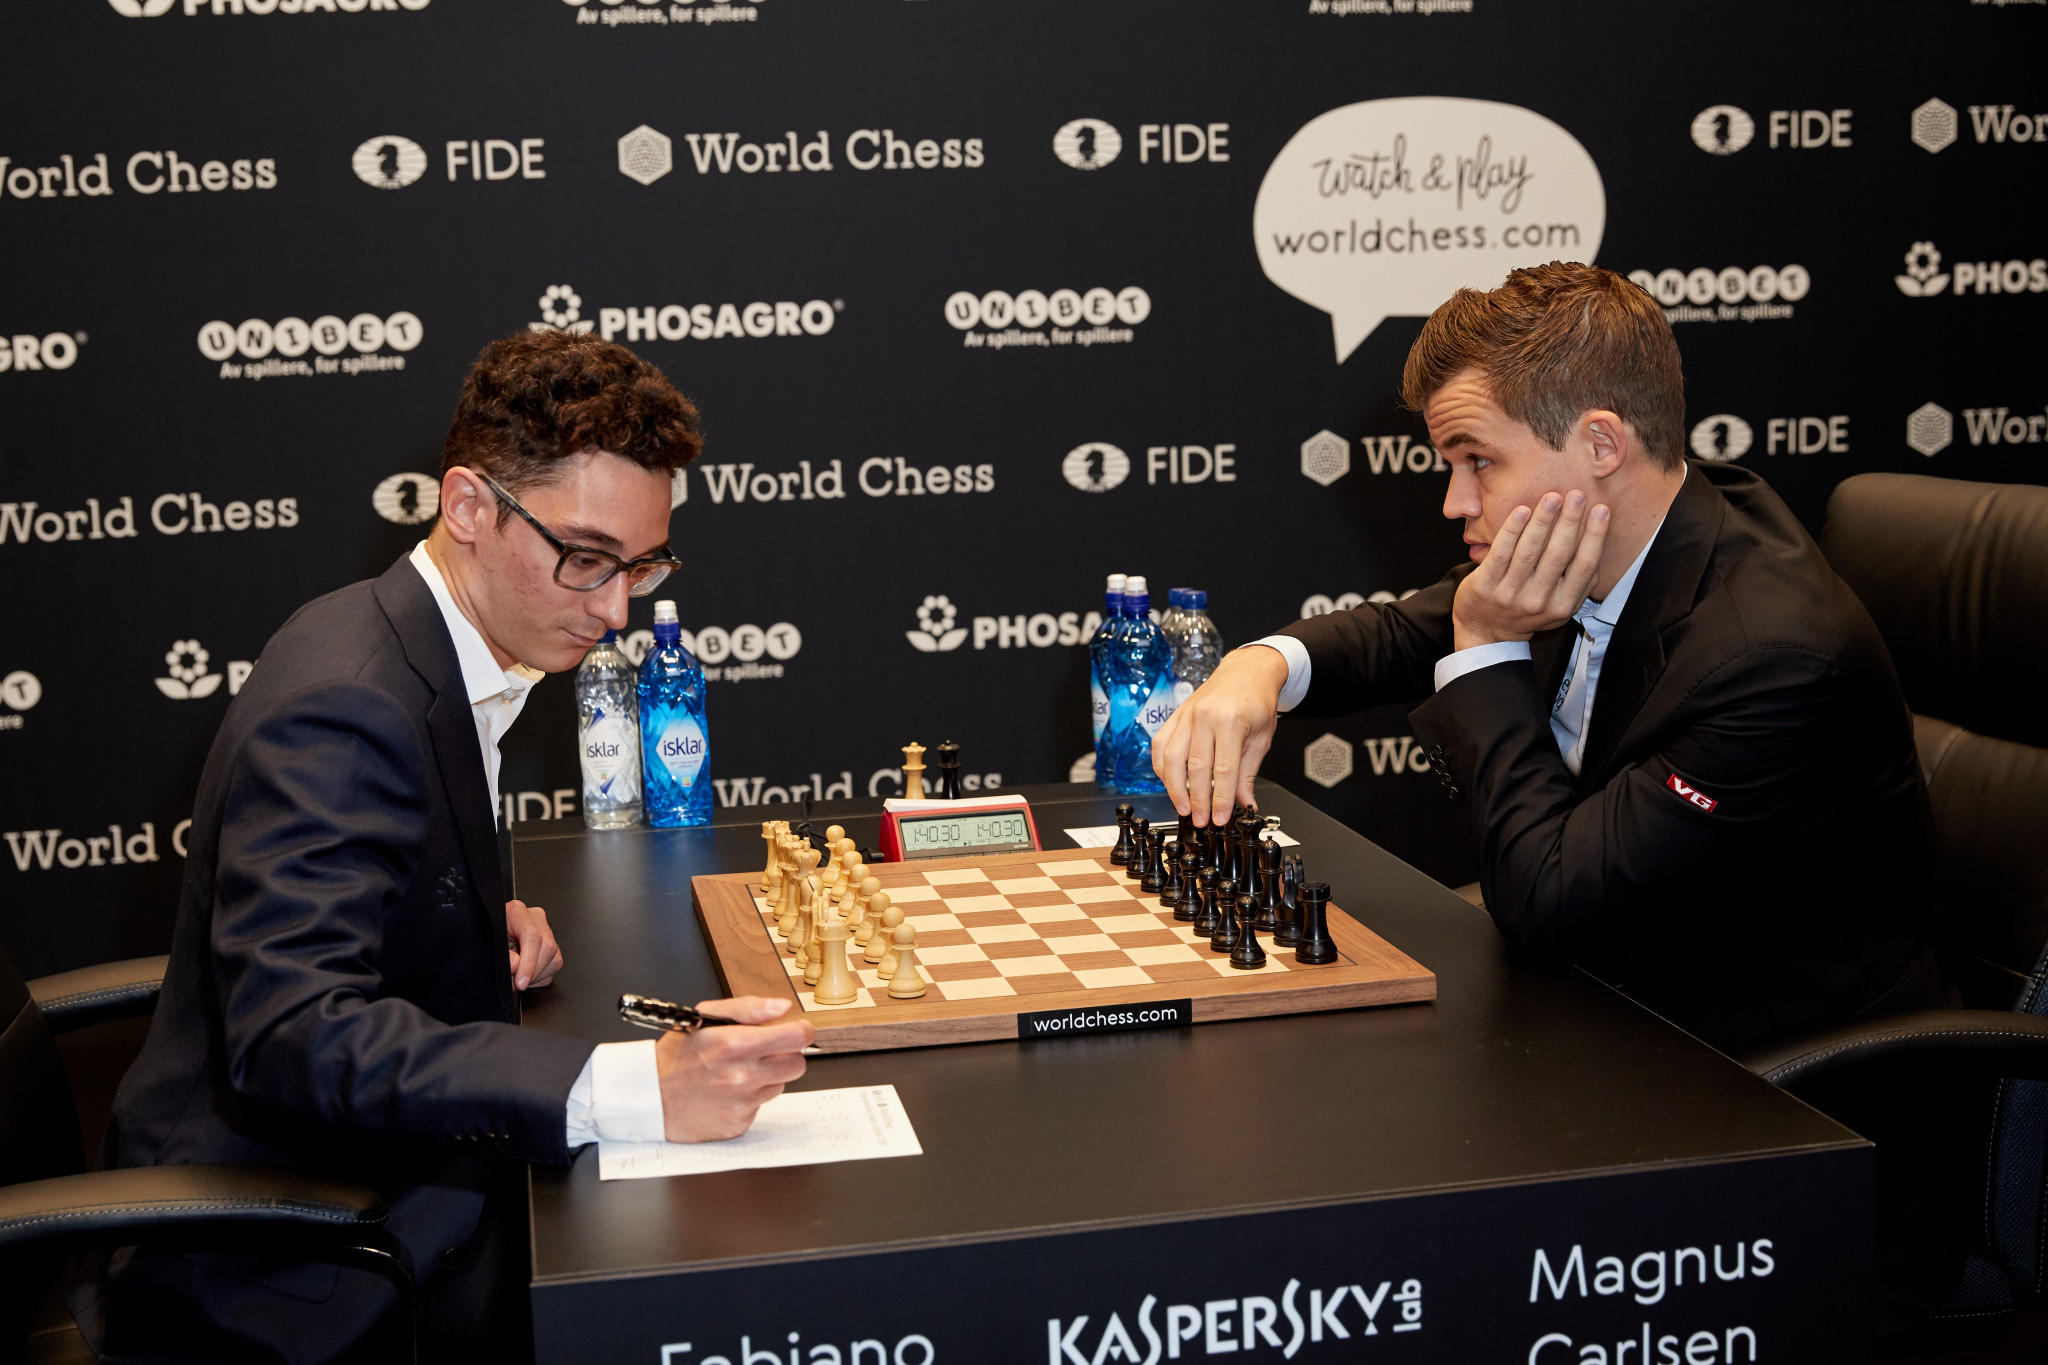 Seventh draw for Carlsen and Caruana as World Chess Championship moves